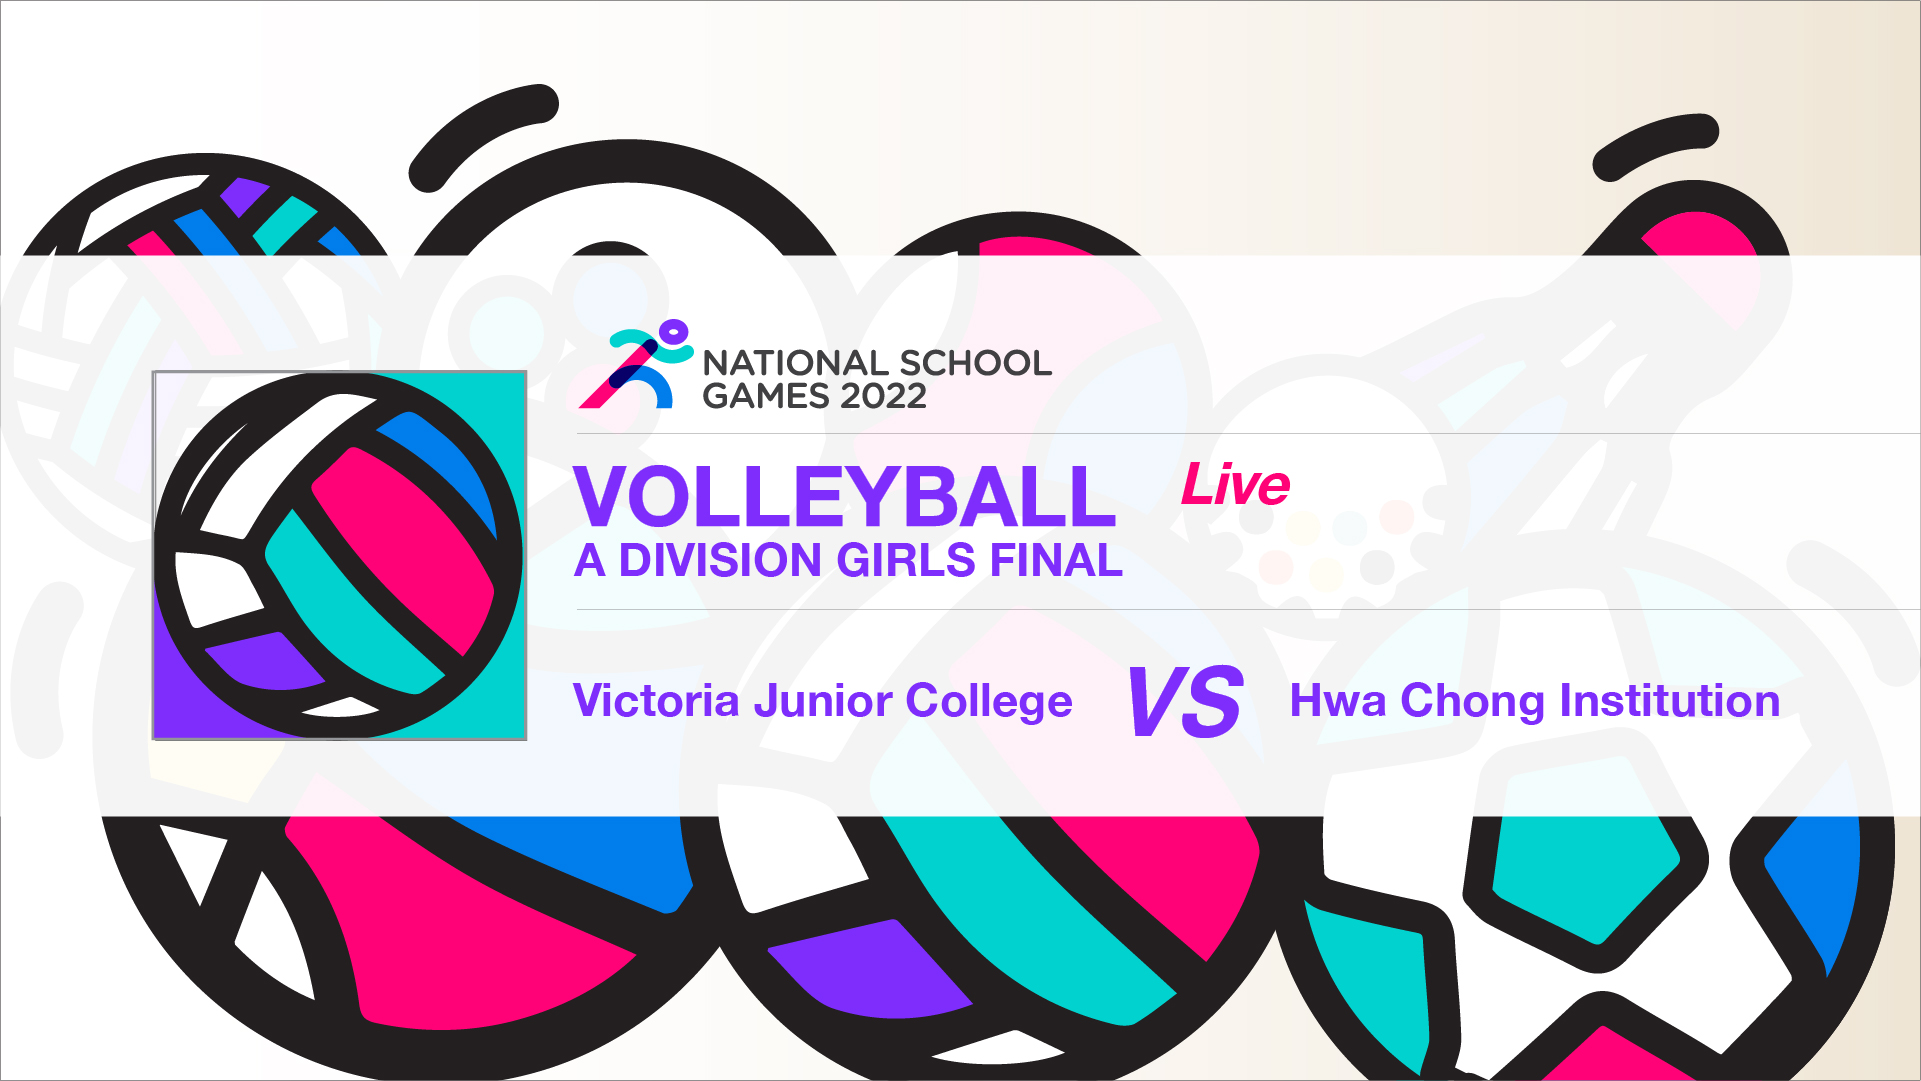 SSSC Volleyball A Division Girls Final | Victoria Junior College vs Hwa Chong Instituition